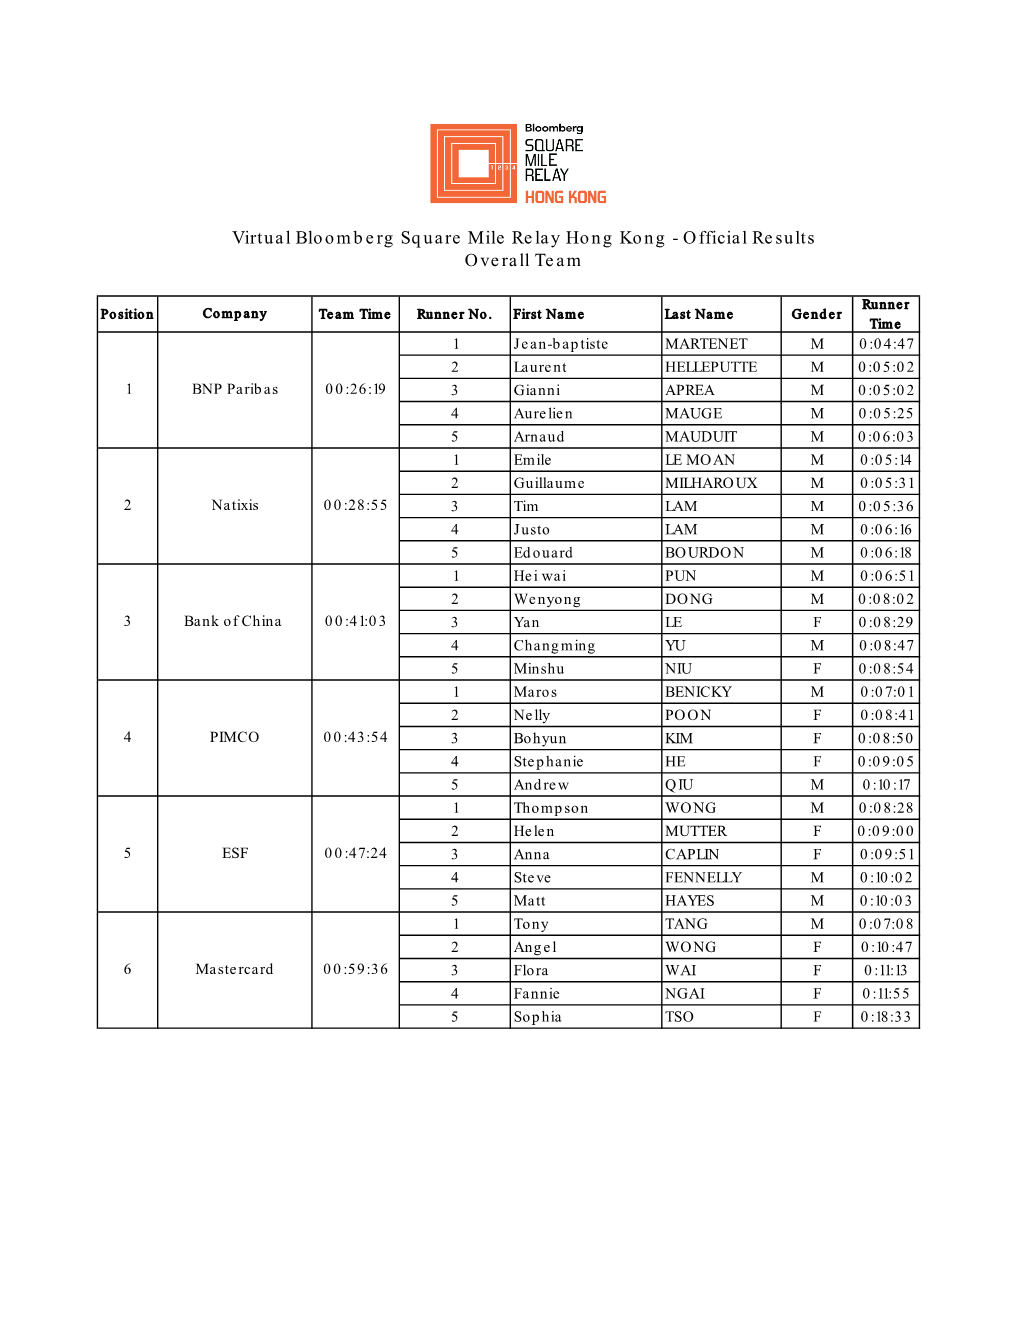 Virtual Bloomberg Square Mile Relay Hong Kong - Official Results Overall Team